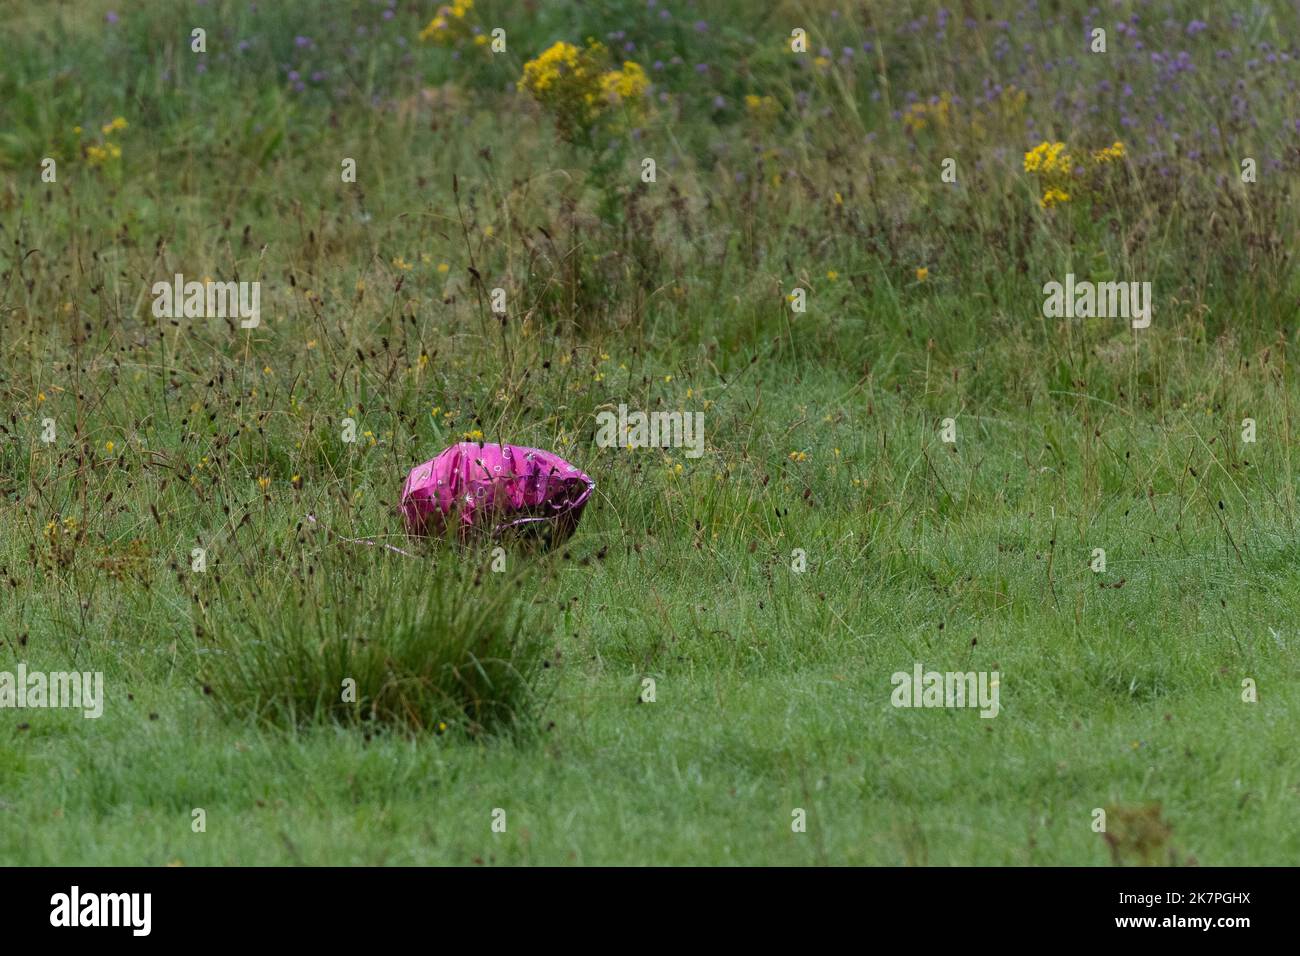 A released helium balloon that has landed in a field causing a threat to the environment. Stock Photo